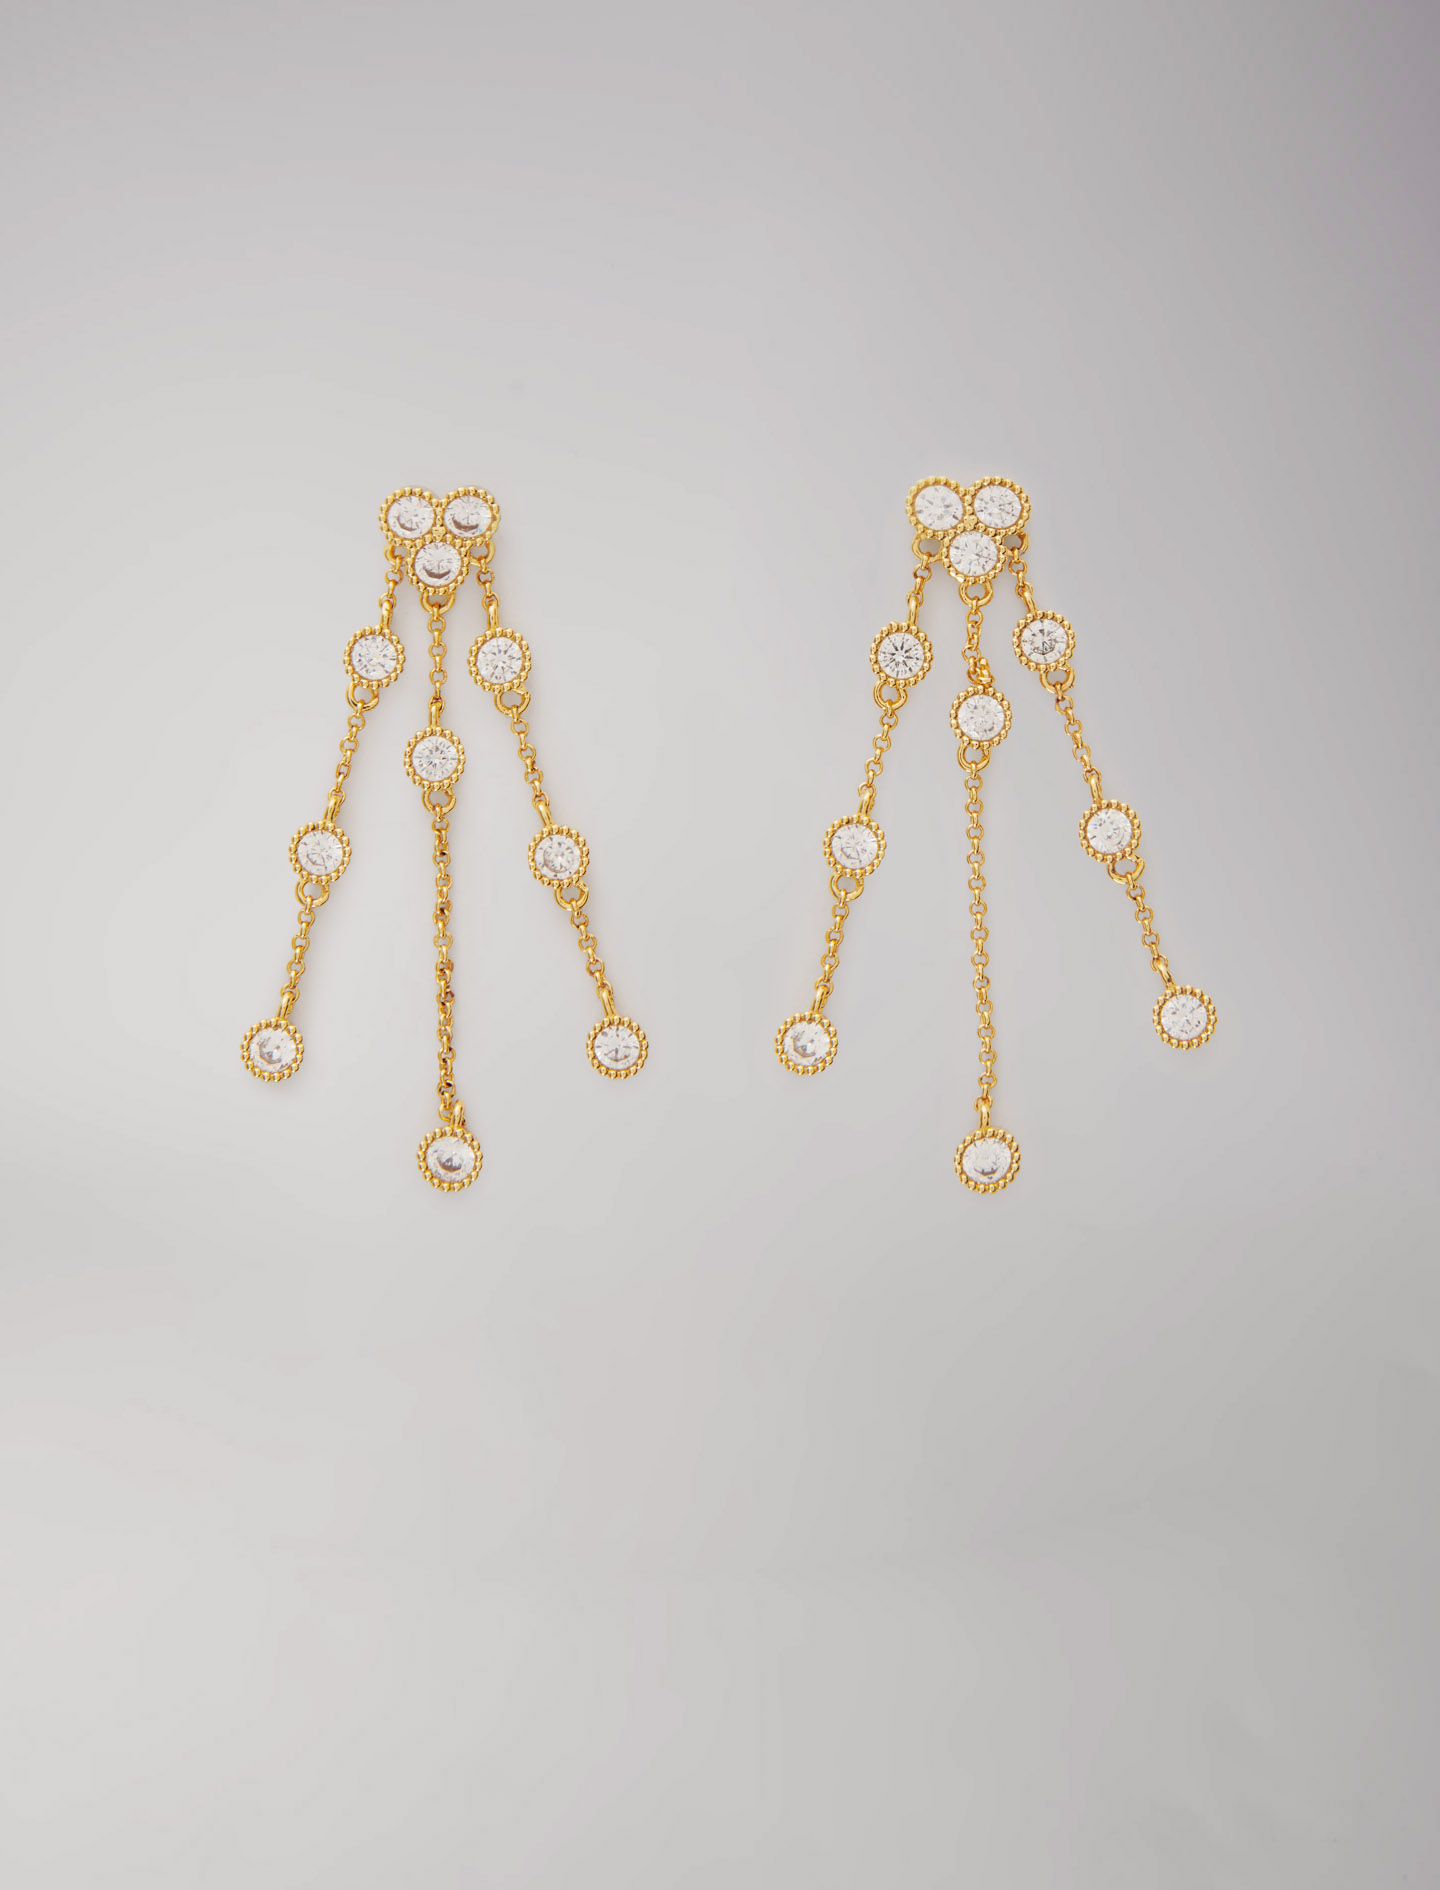 Maje Woman's zirconium oxide Jewellery: Gold-plated recycled brass earrings, in color Gold / Yellow